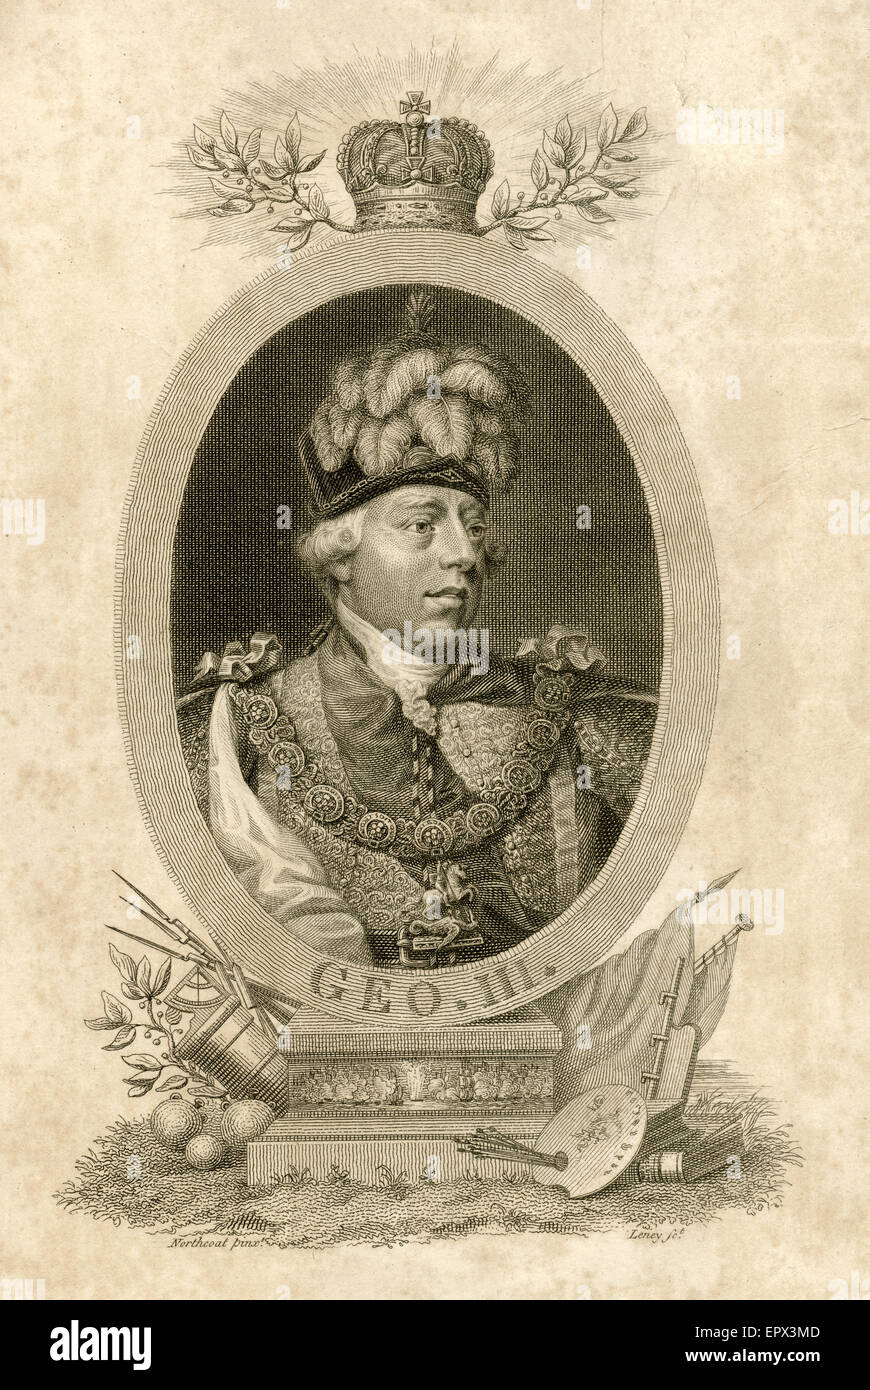 Antique 1817 steel engraving of King George III of the United Kingdom. George III (George William Frederick; 1738 Ð 1820) was King of Great Britain and Ireland from 25 October 1760 until the union of the two countries on 1 January 1801, after which he was King of the United Kingdom of Great Britain and Ireland until his death. Stock Photo